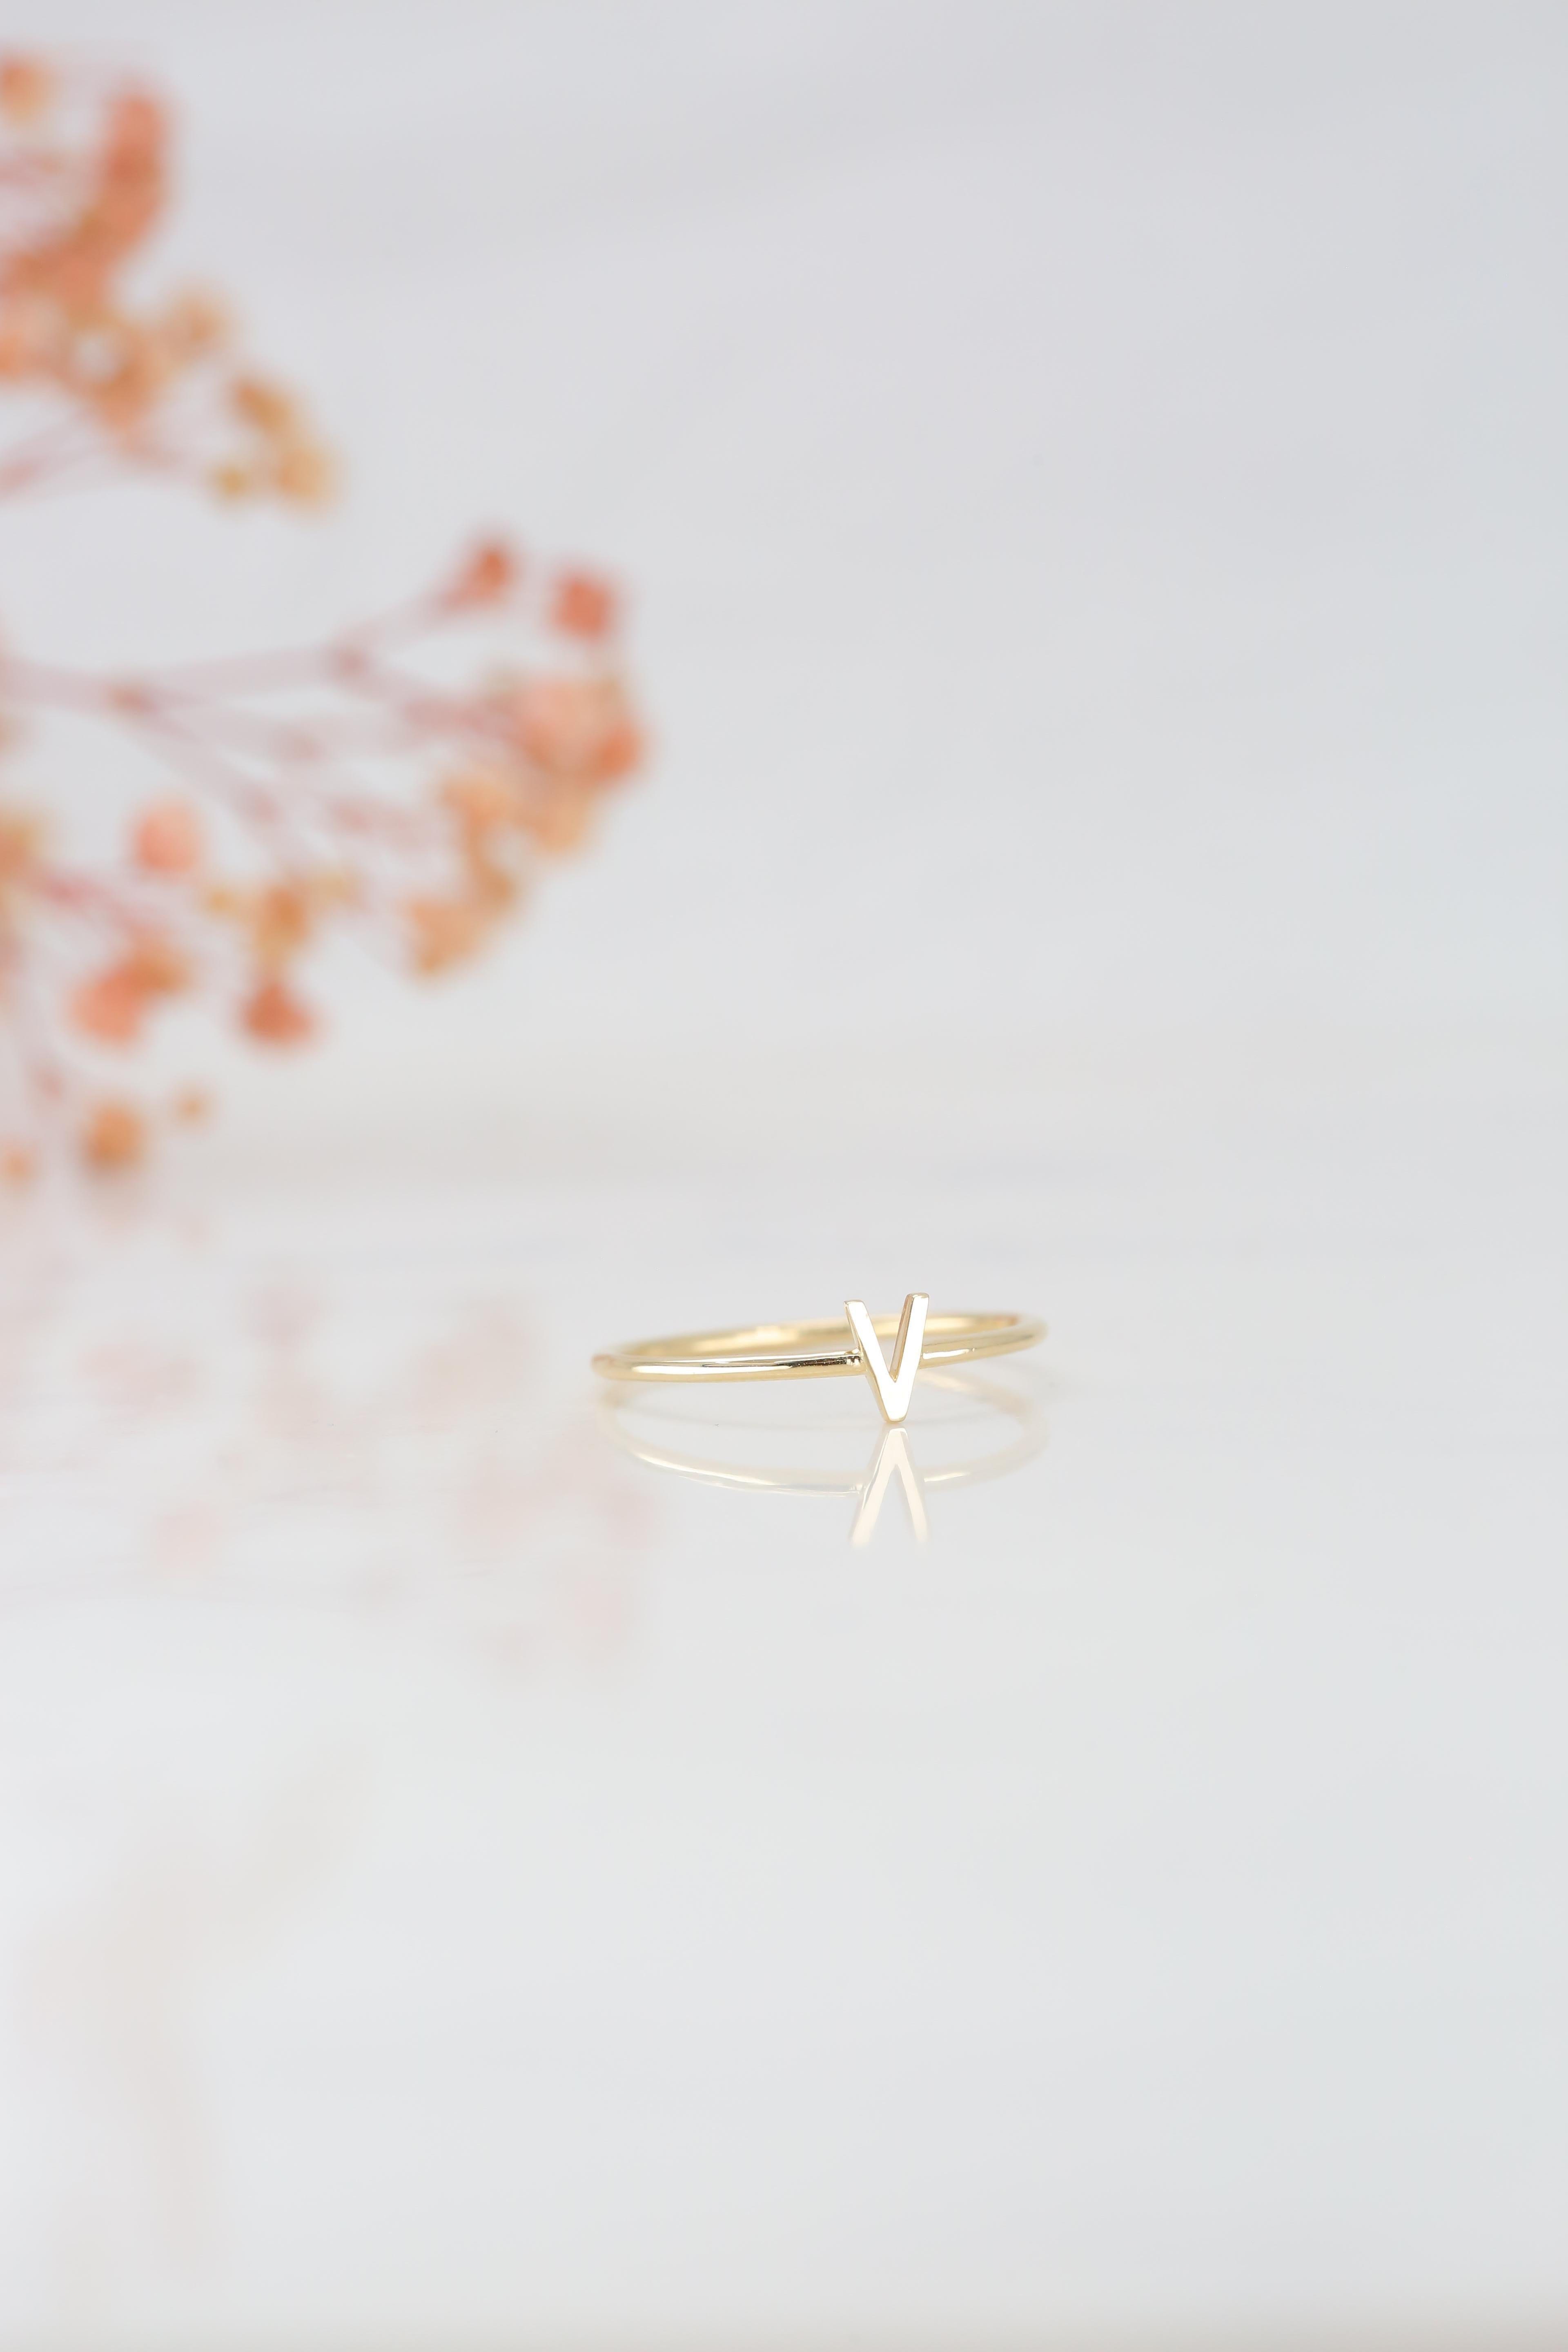 For Sale:  14K Gold Initial V Letter Ring, Personalized Initial Letter Ring 7